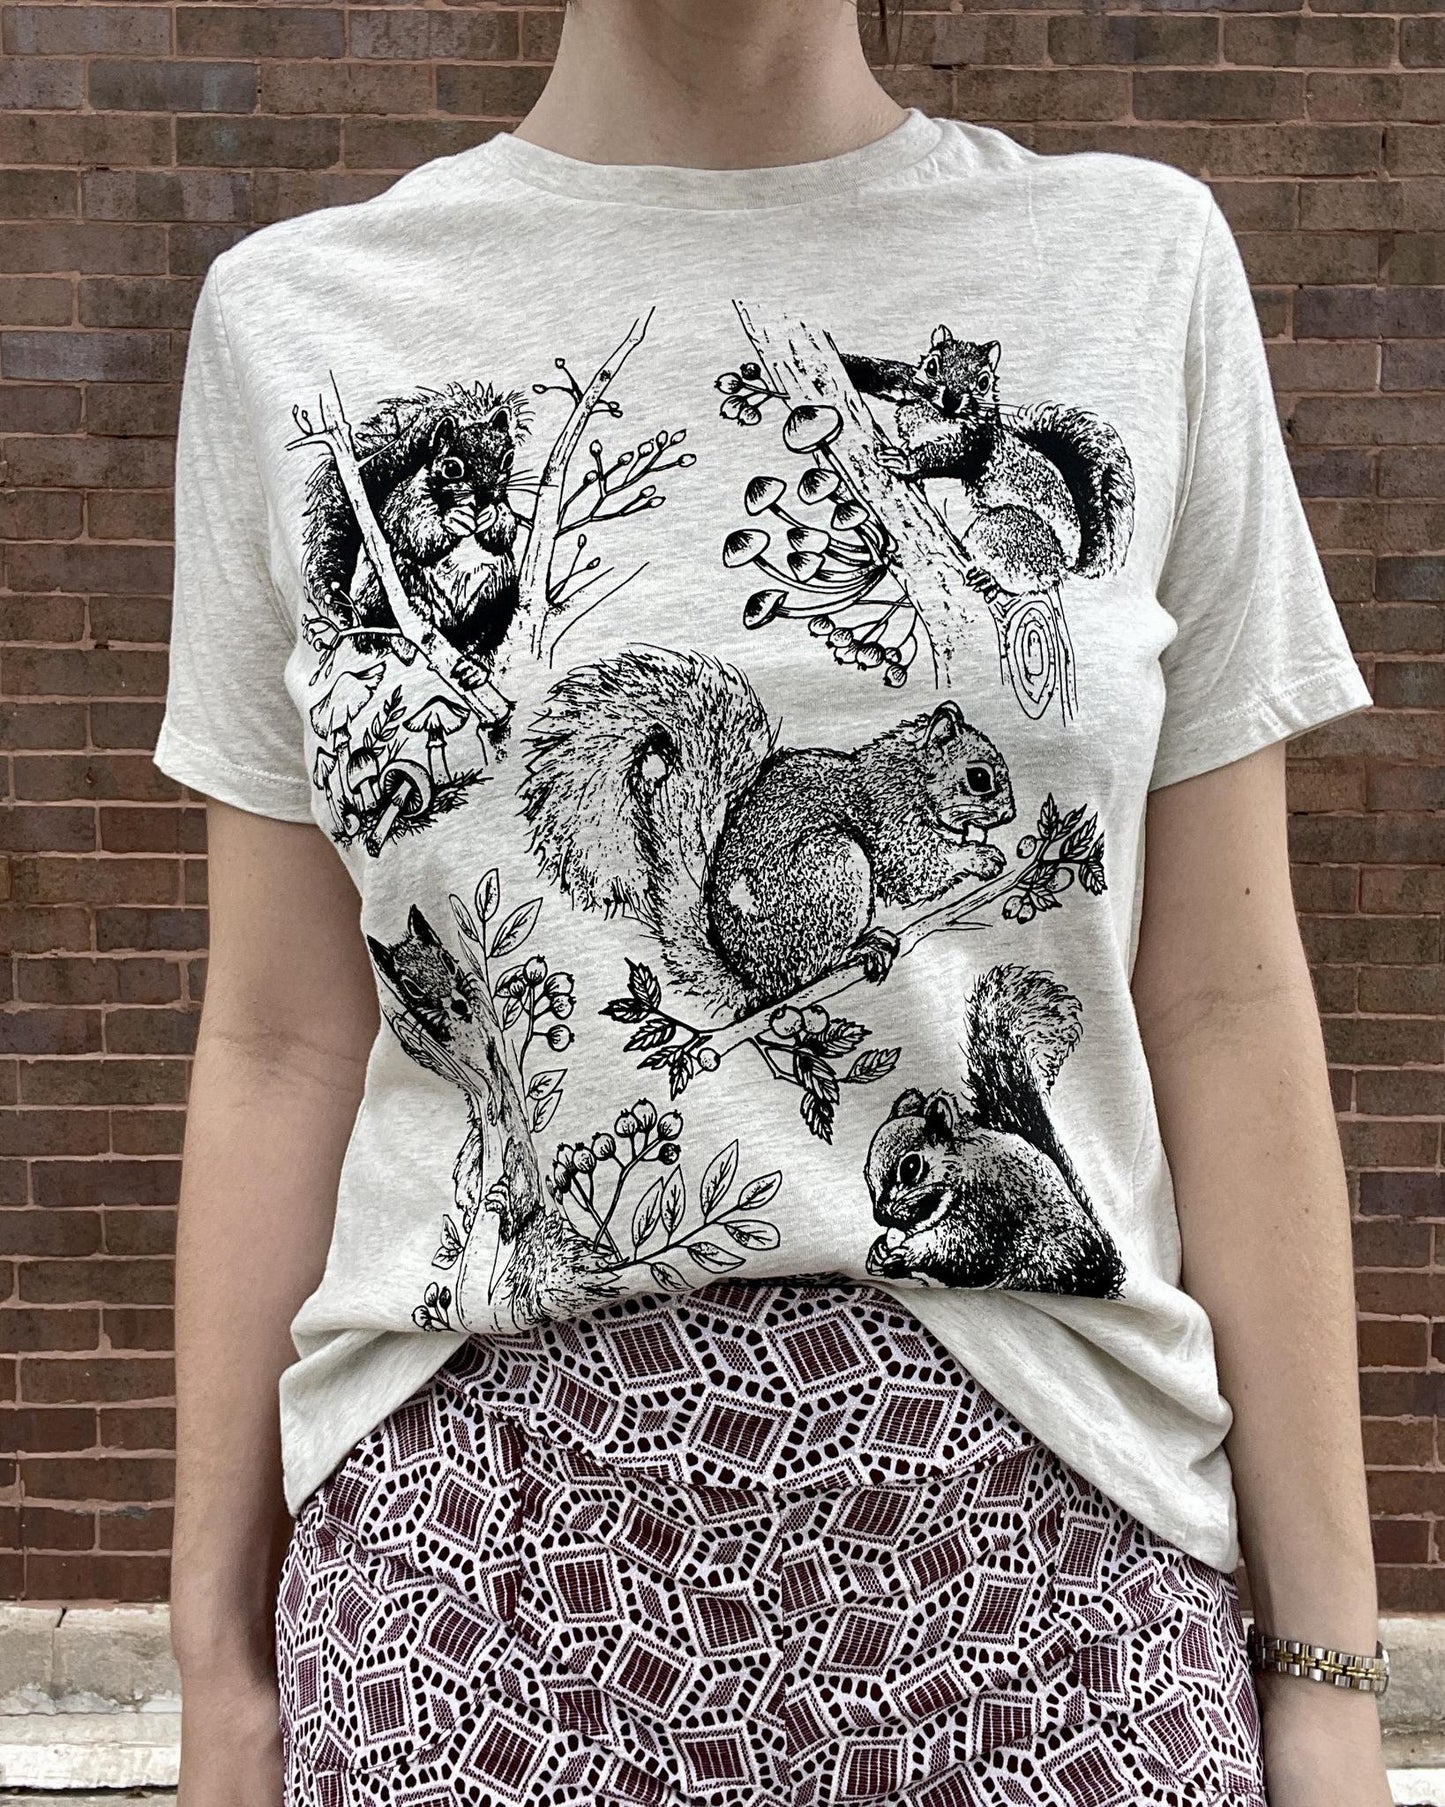 Mad Love Heather Natural Tee with Squirrels